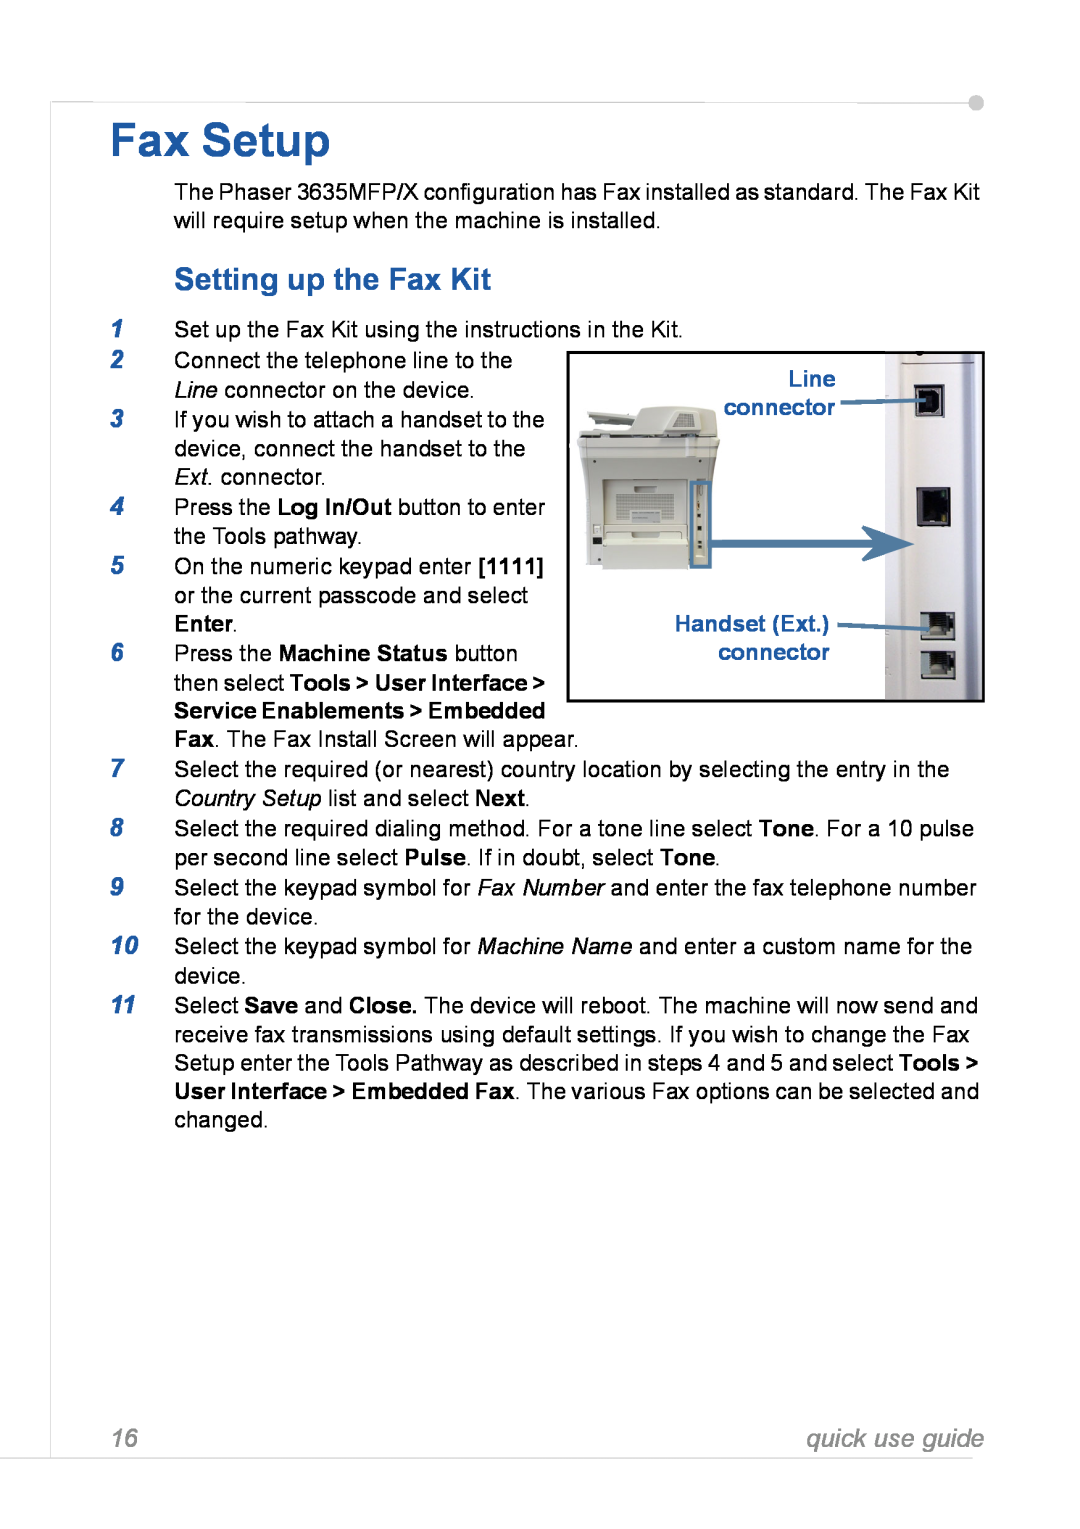 Xerox 3635MFP manual Fax Setup, Setting up the Fax Kit, Service Enablements > Embedded, quick use guide 